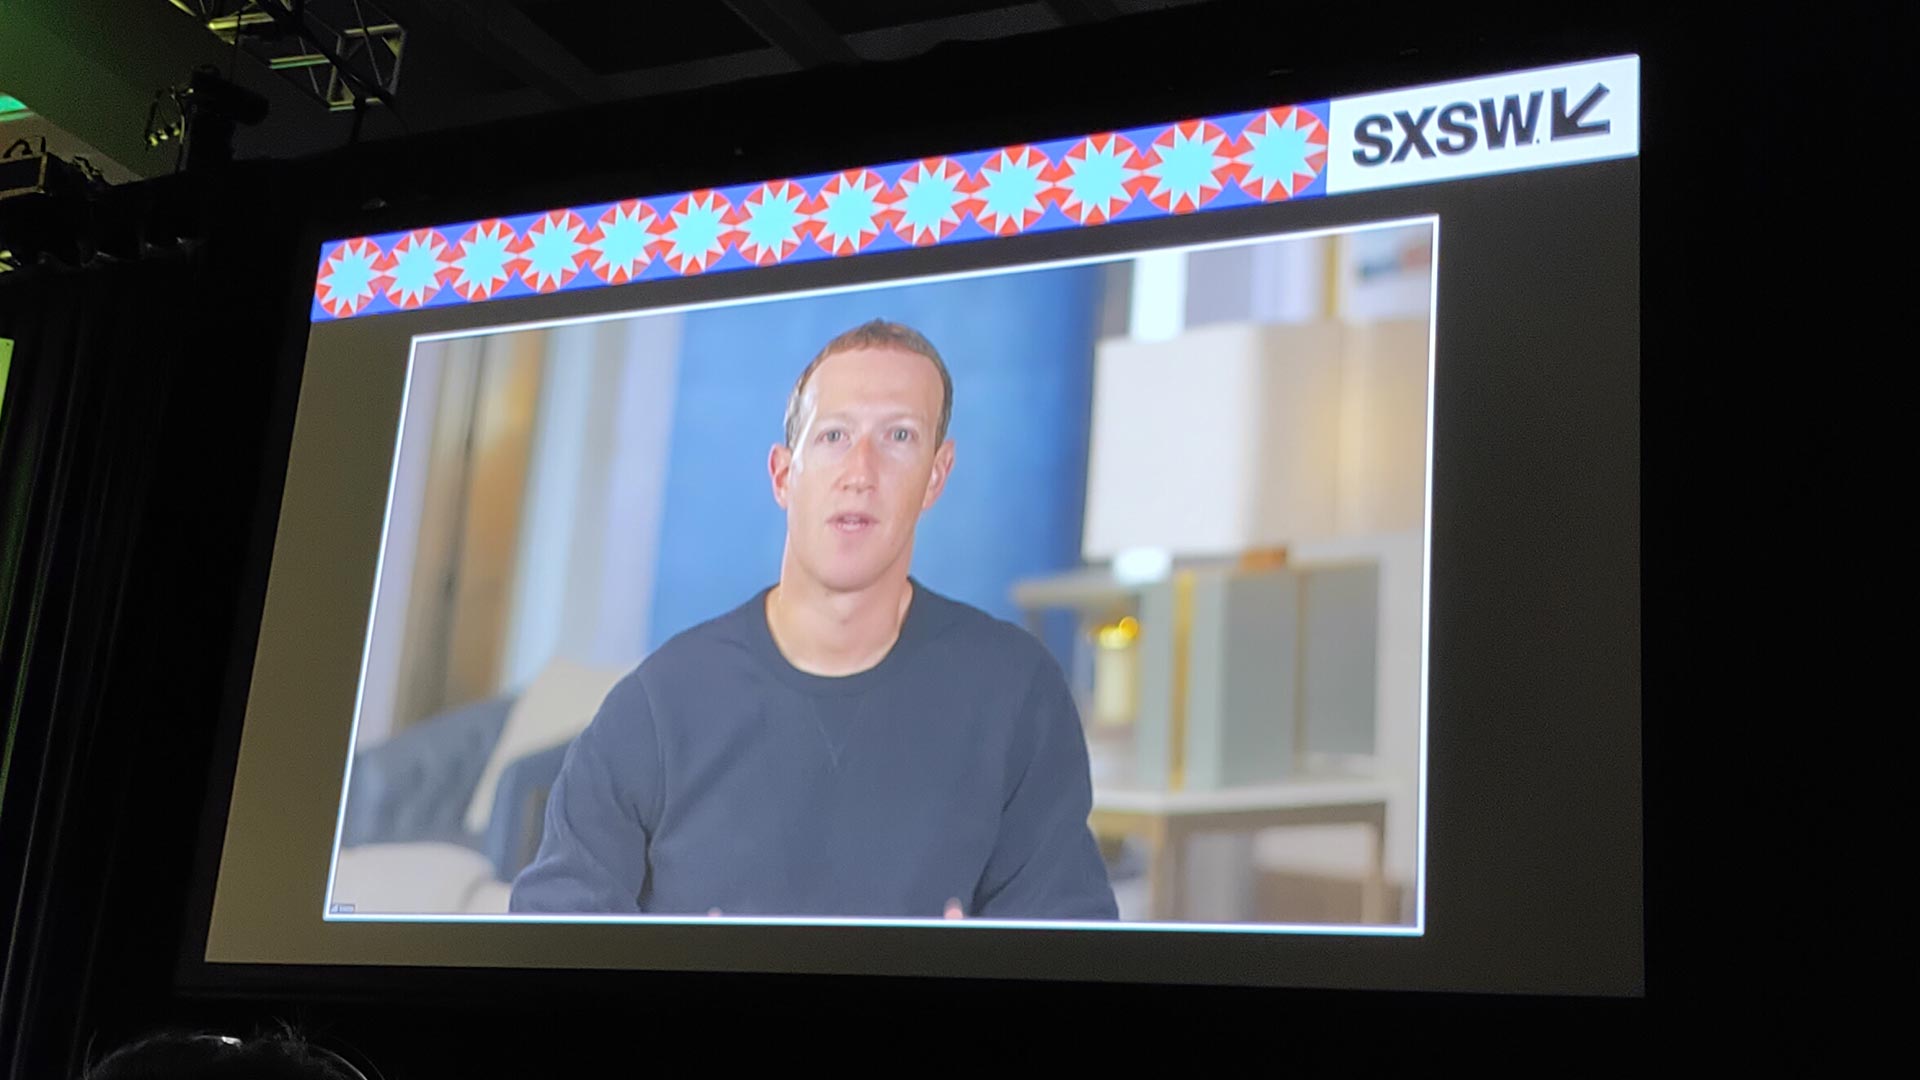 Mark Zuckerberg talks about his vision for Meta at SXSW - The Ghost Howls